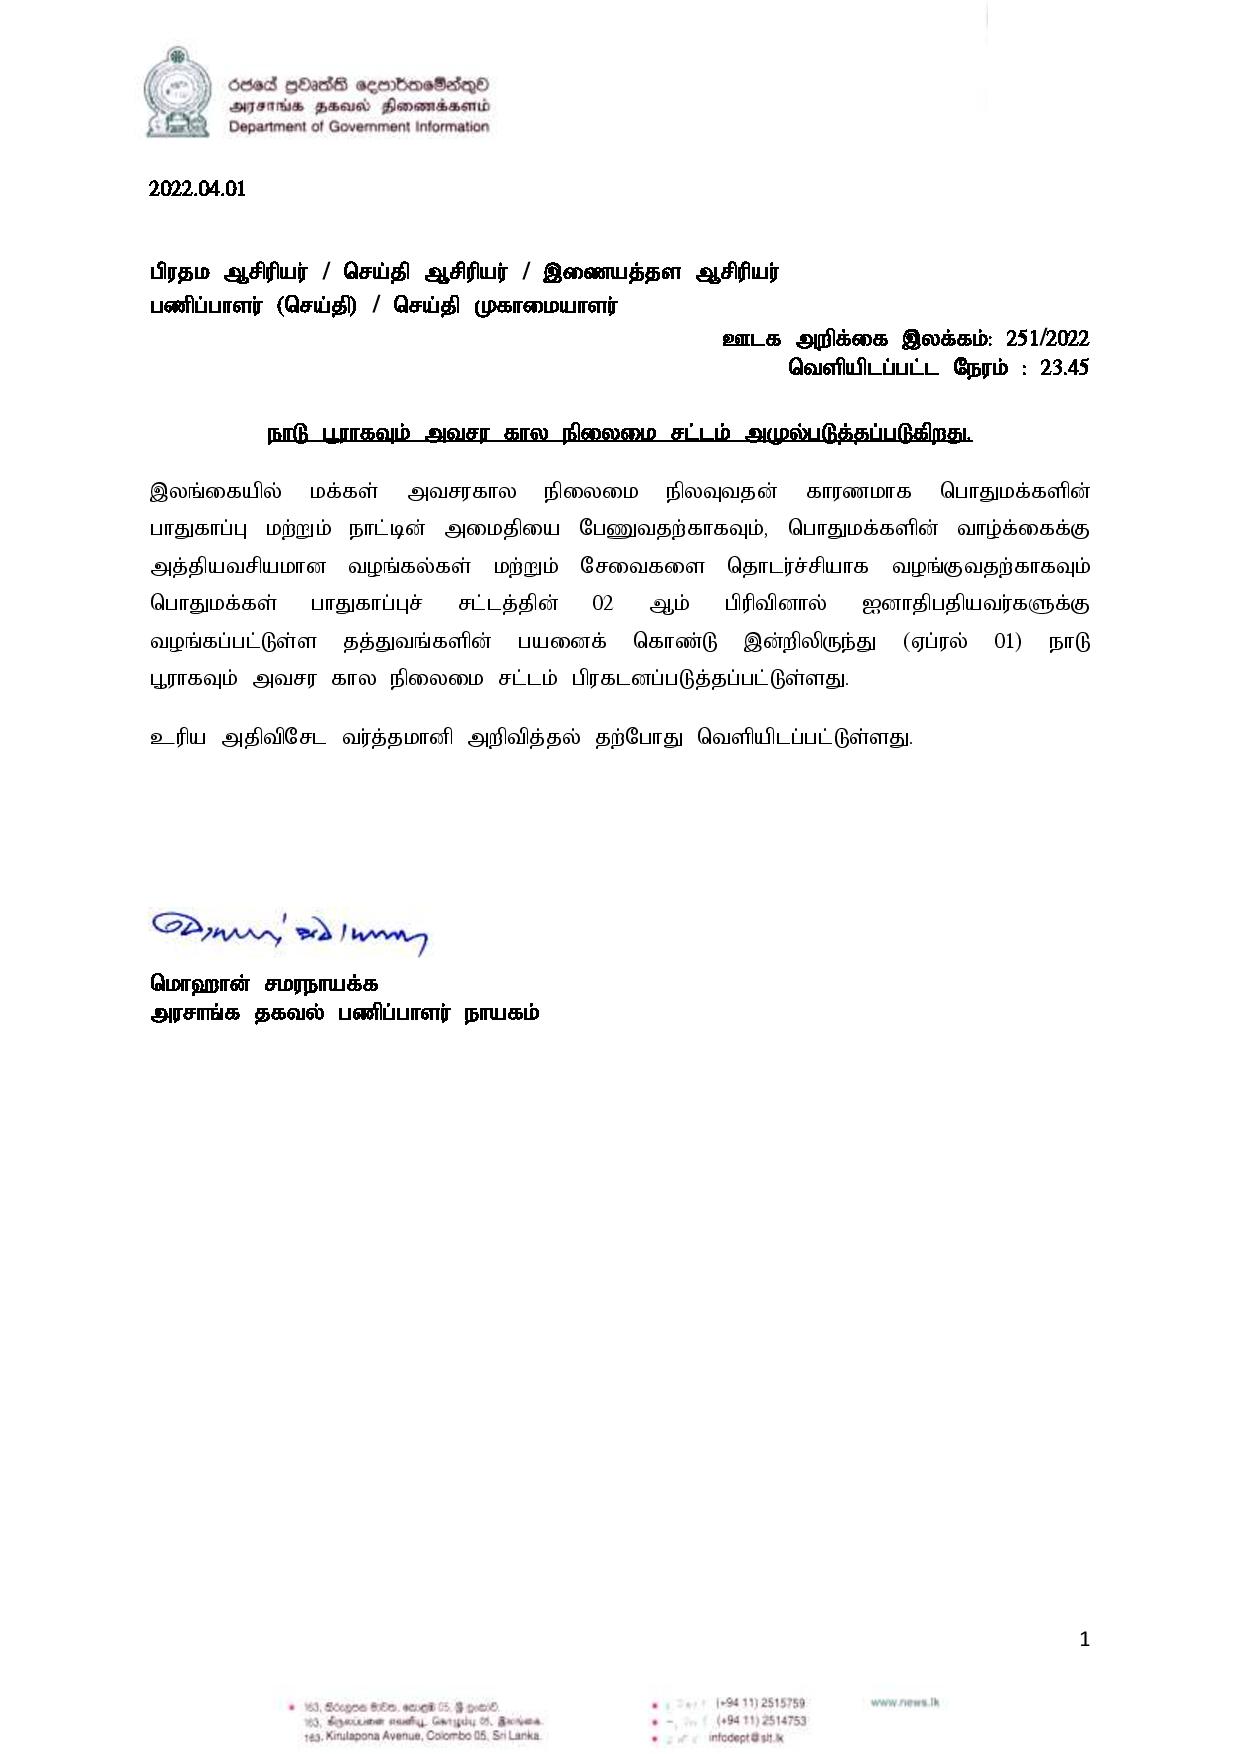 Press Release 251 Tamil 1 page 001